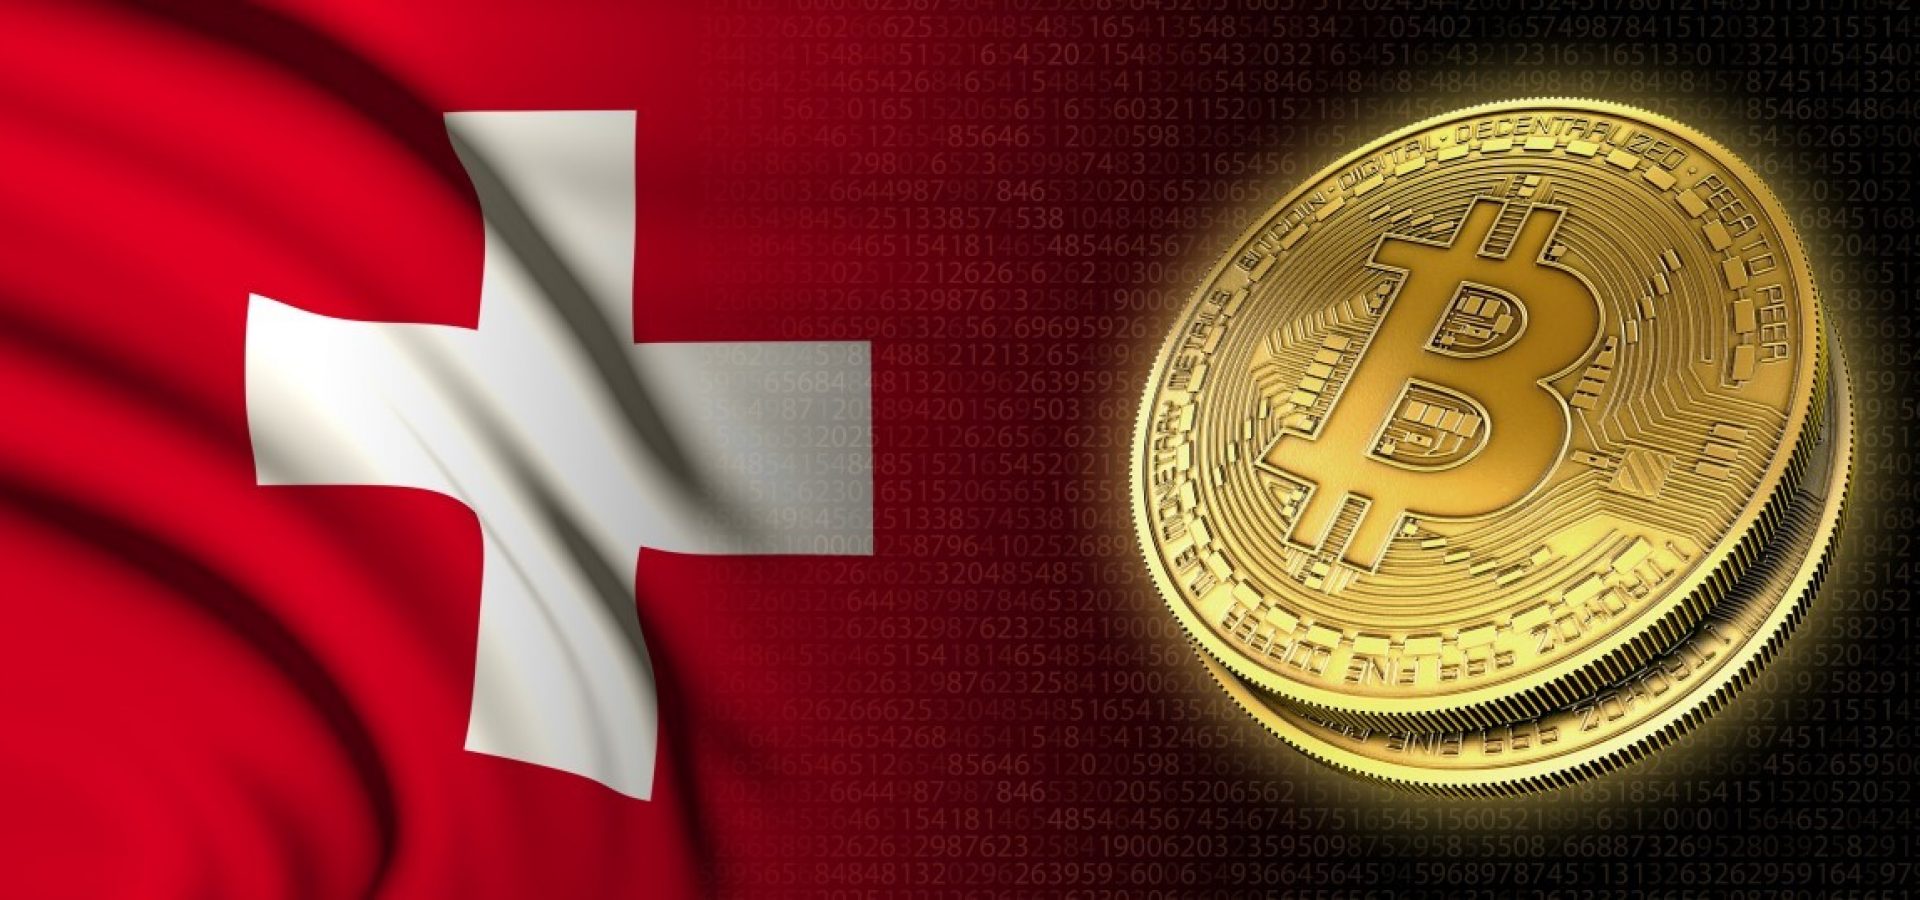 Swiss crypto bank and its plans